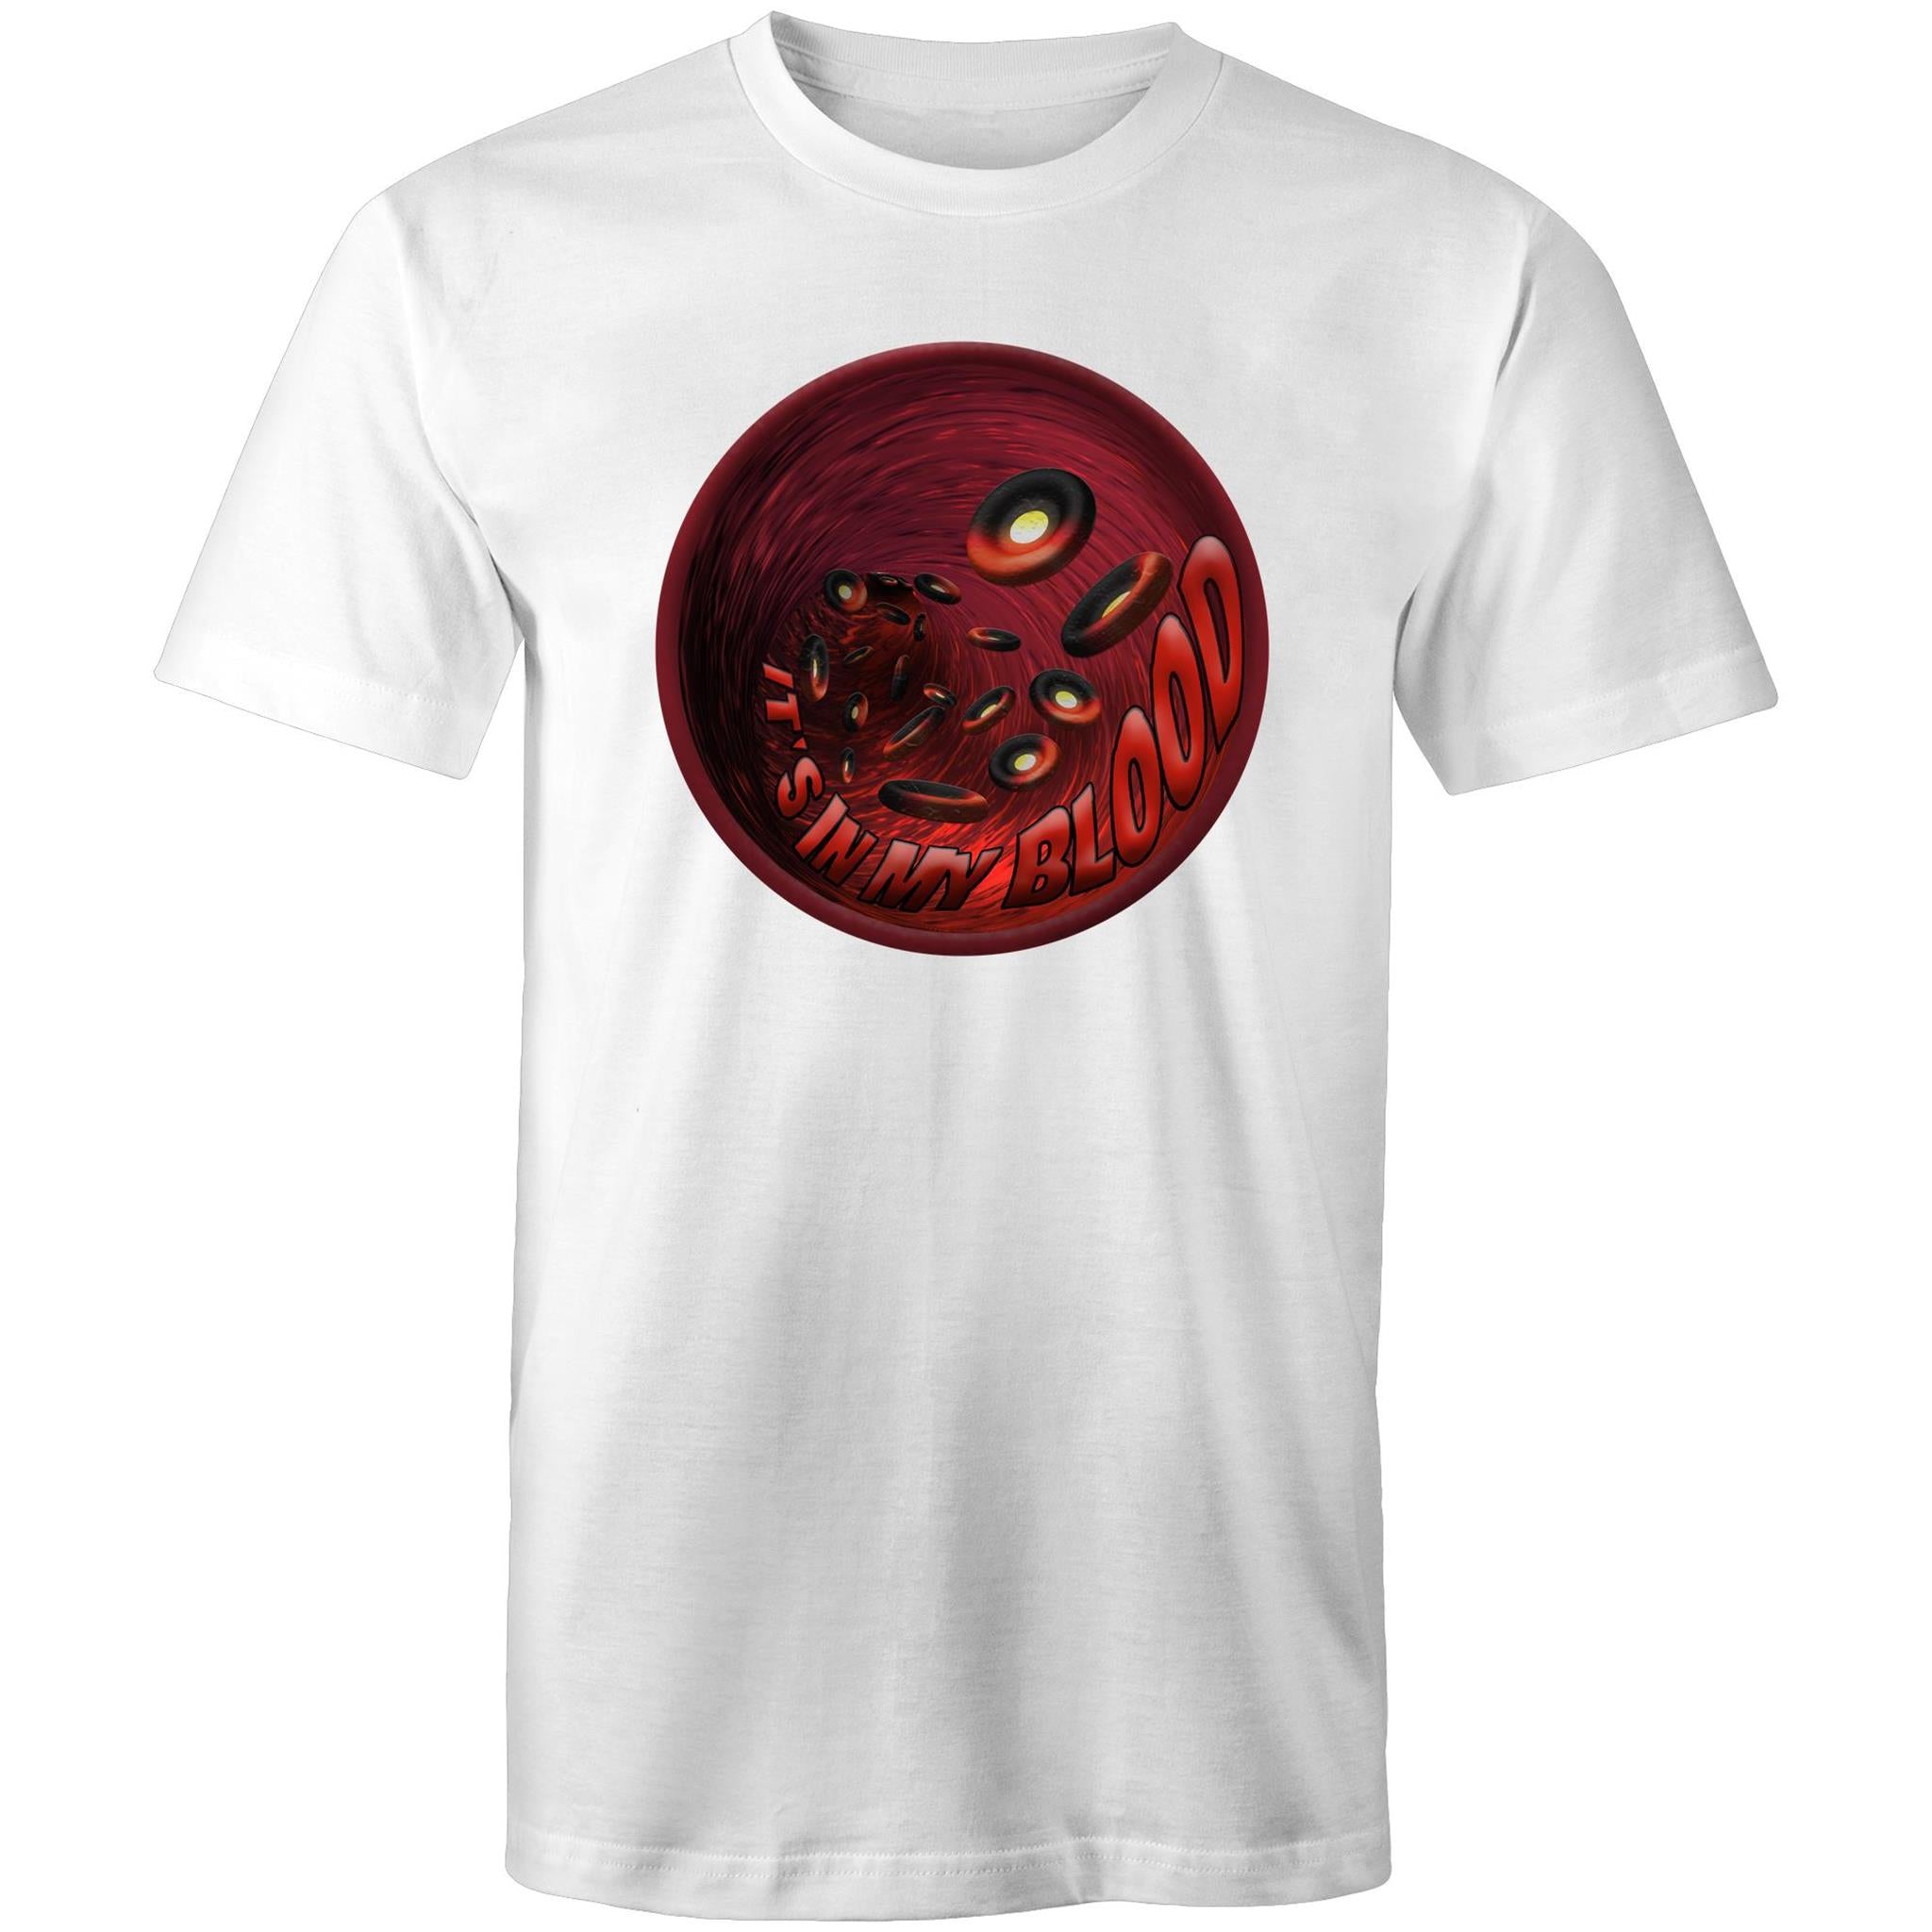 'It's In My Blood' New Dawn - T-Shirt